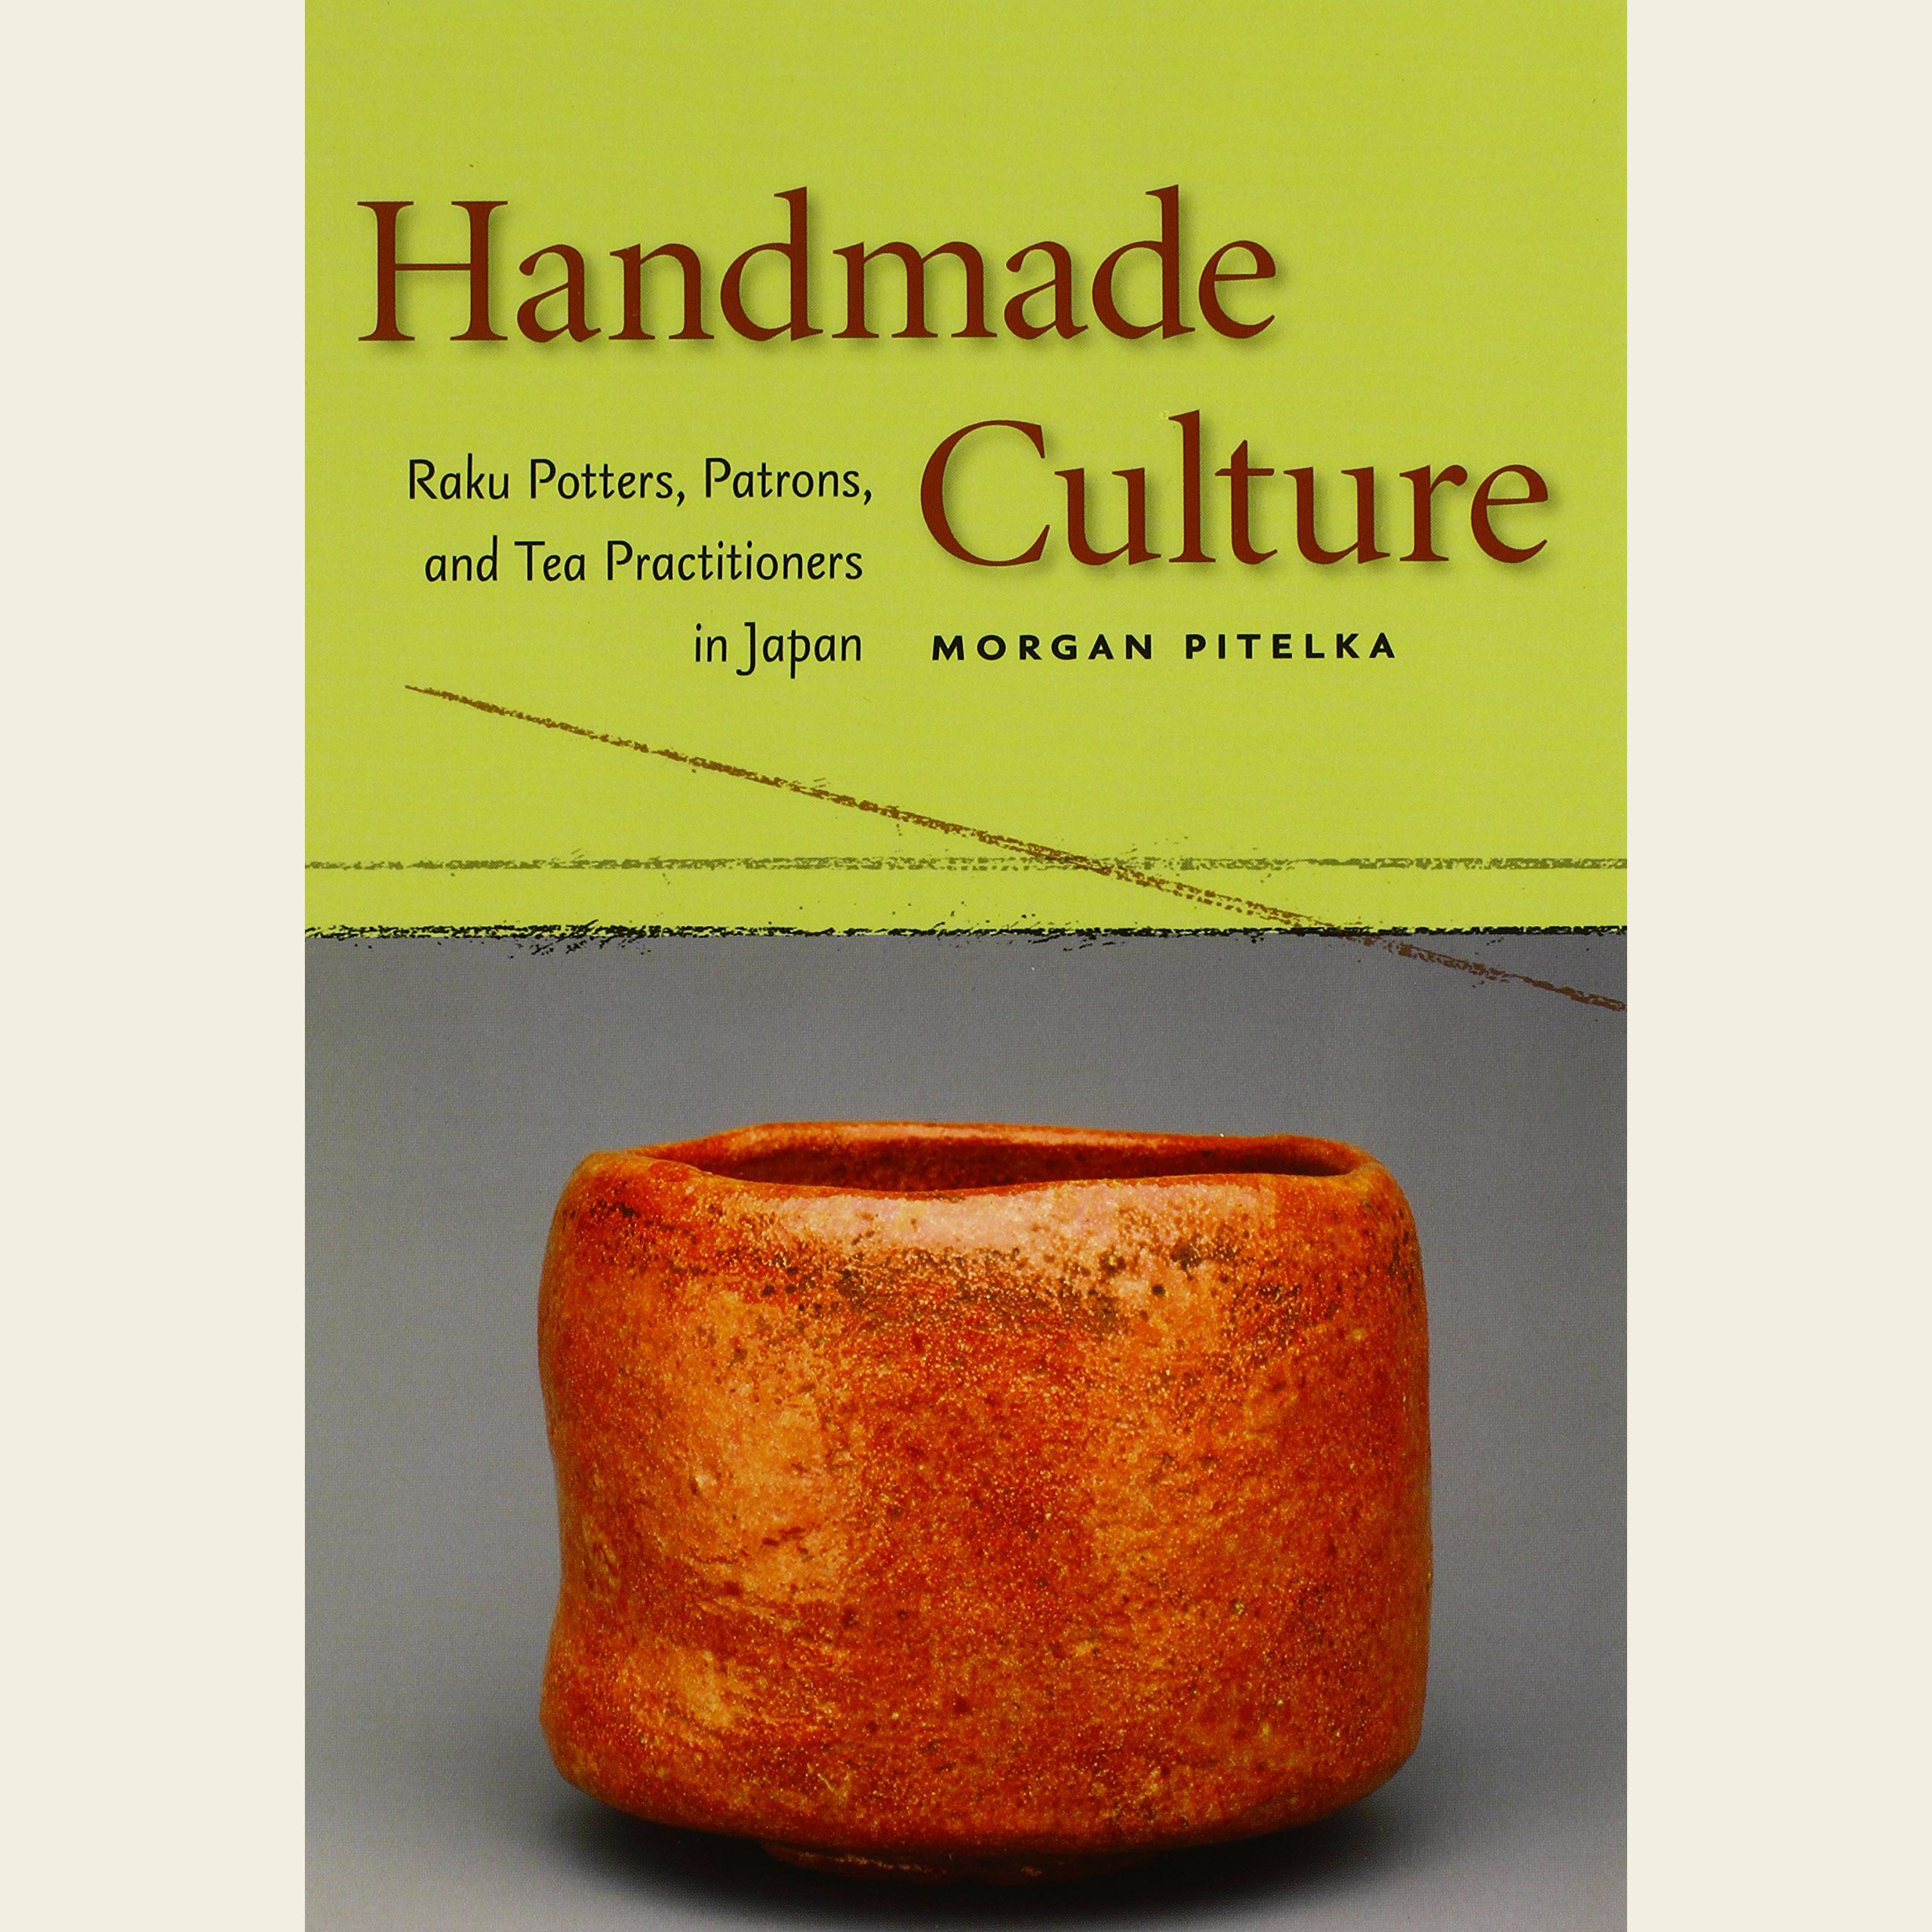 Handmade in Japan - A book about Japanese craftmanship and